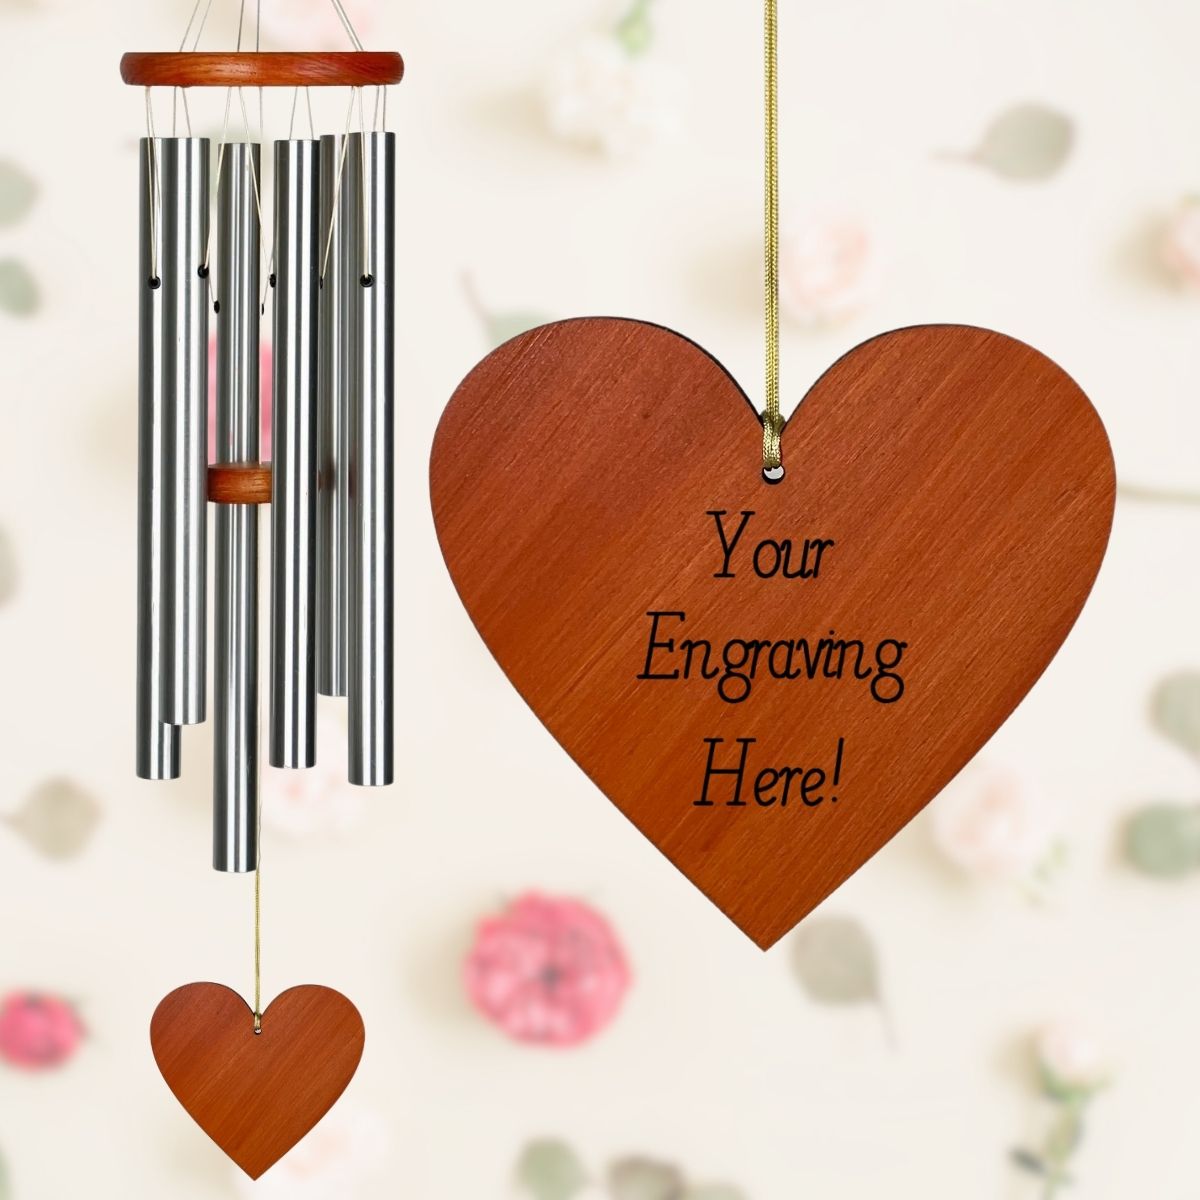 Amazing Grace 25 Inch Wind Chime - Engravable Heart Sail - Silver